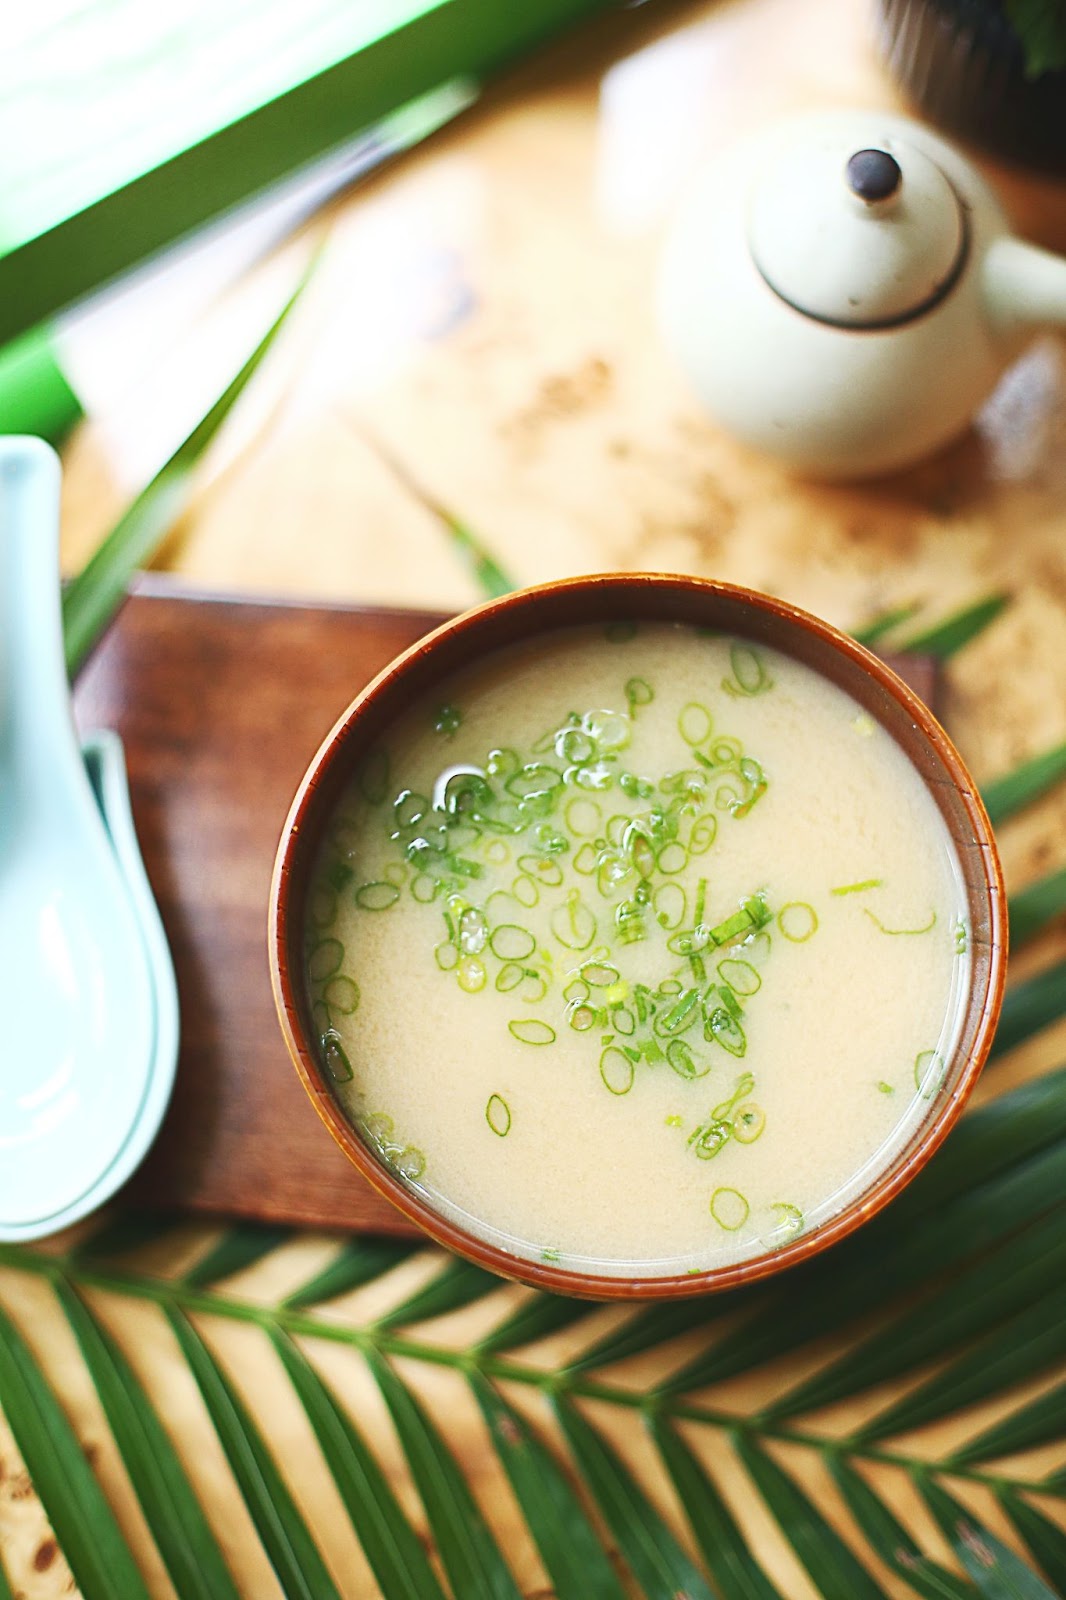 Having hearty soup is an organic treatment for cold + flu.